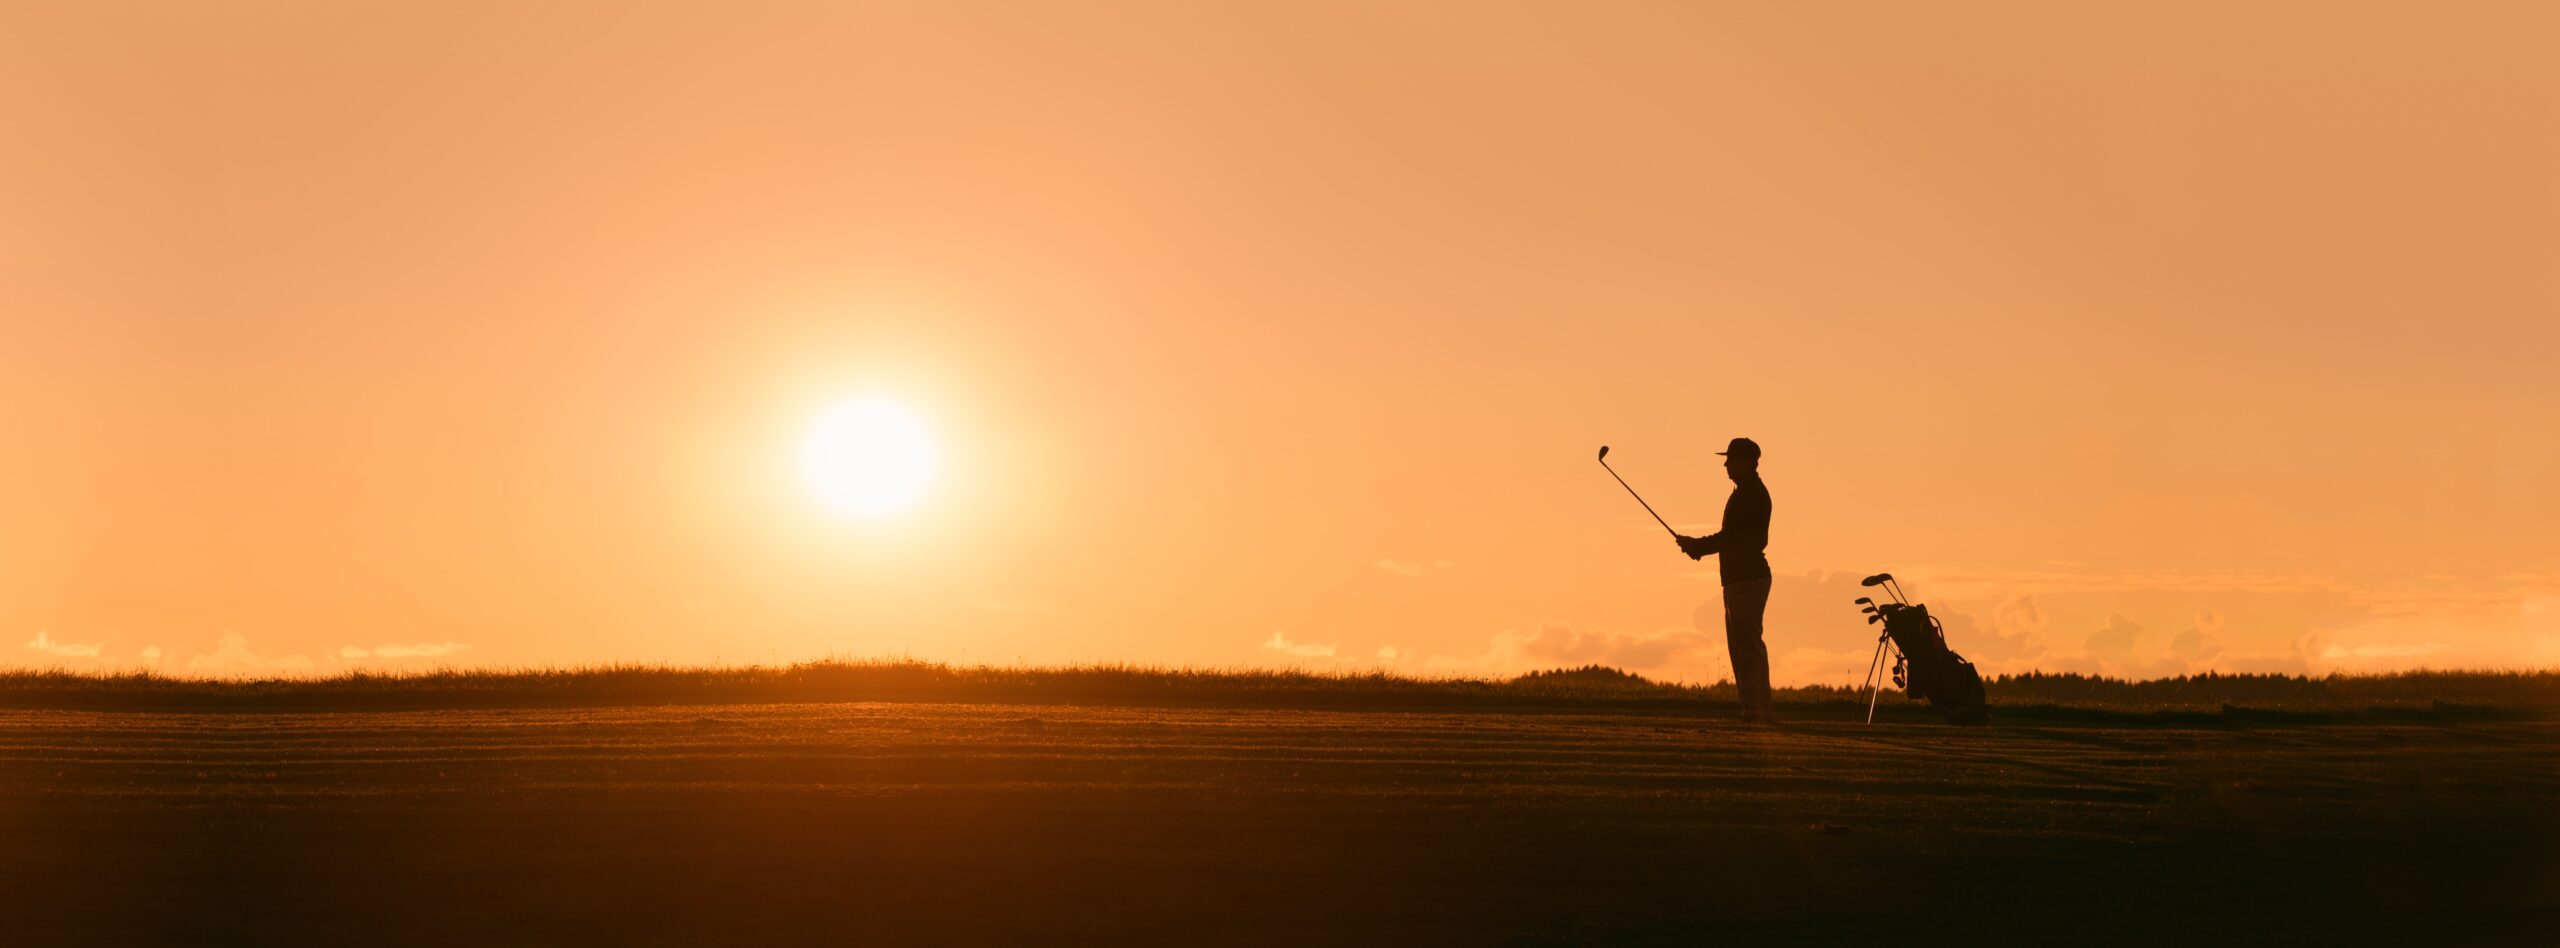 A wide shot of a silhouette of a golfer in front of a sunset.